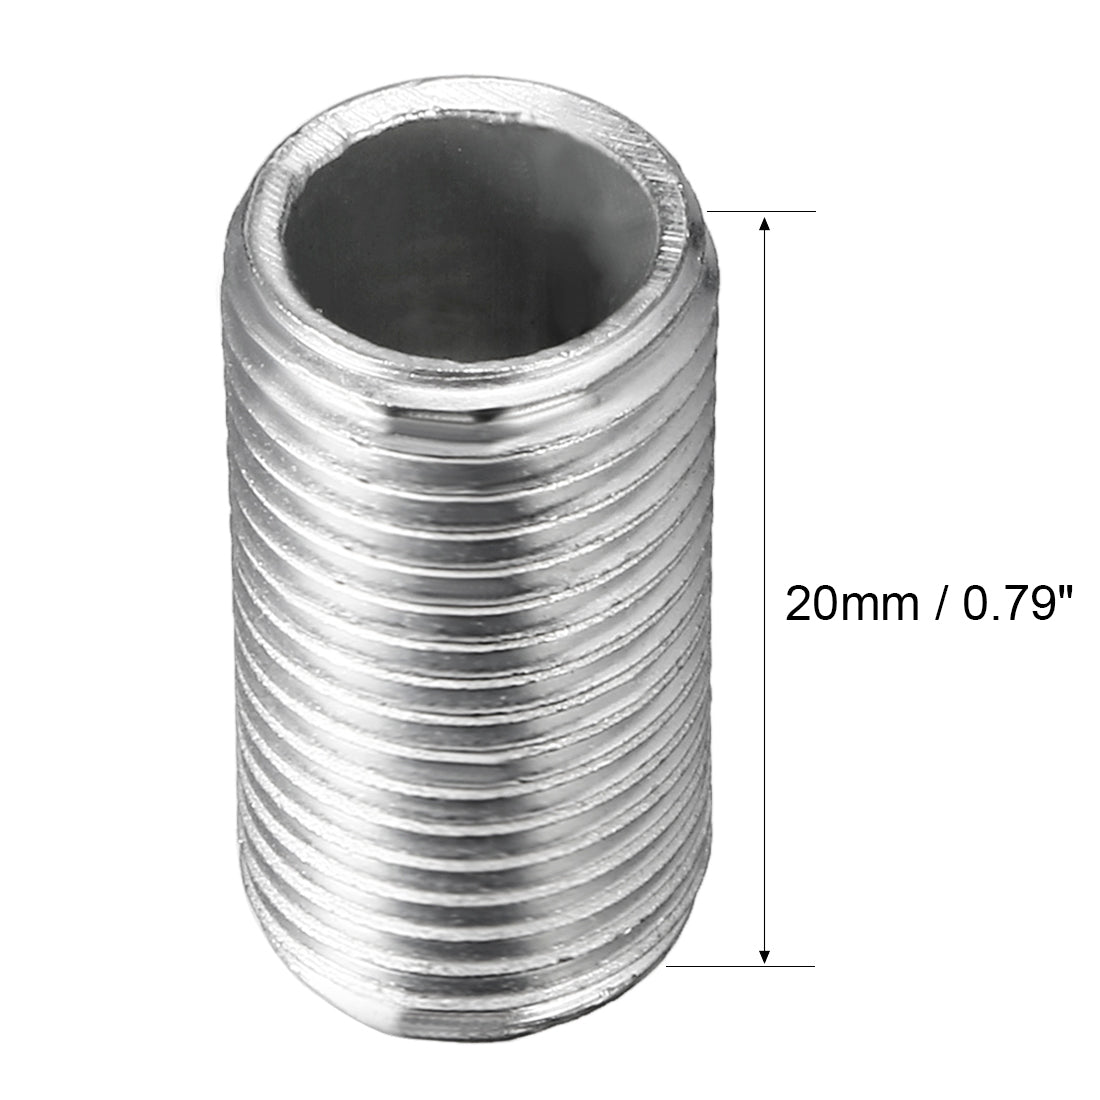 uxcell Uxcell Zinc Plated Lamp Pipe Nipple M10 20mm Length 1mm Pitch All Threaded 10Pcs